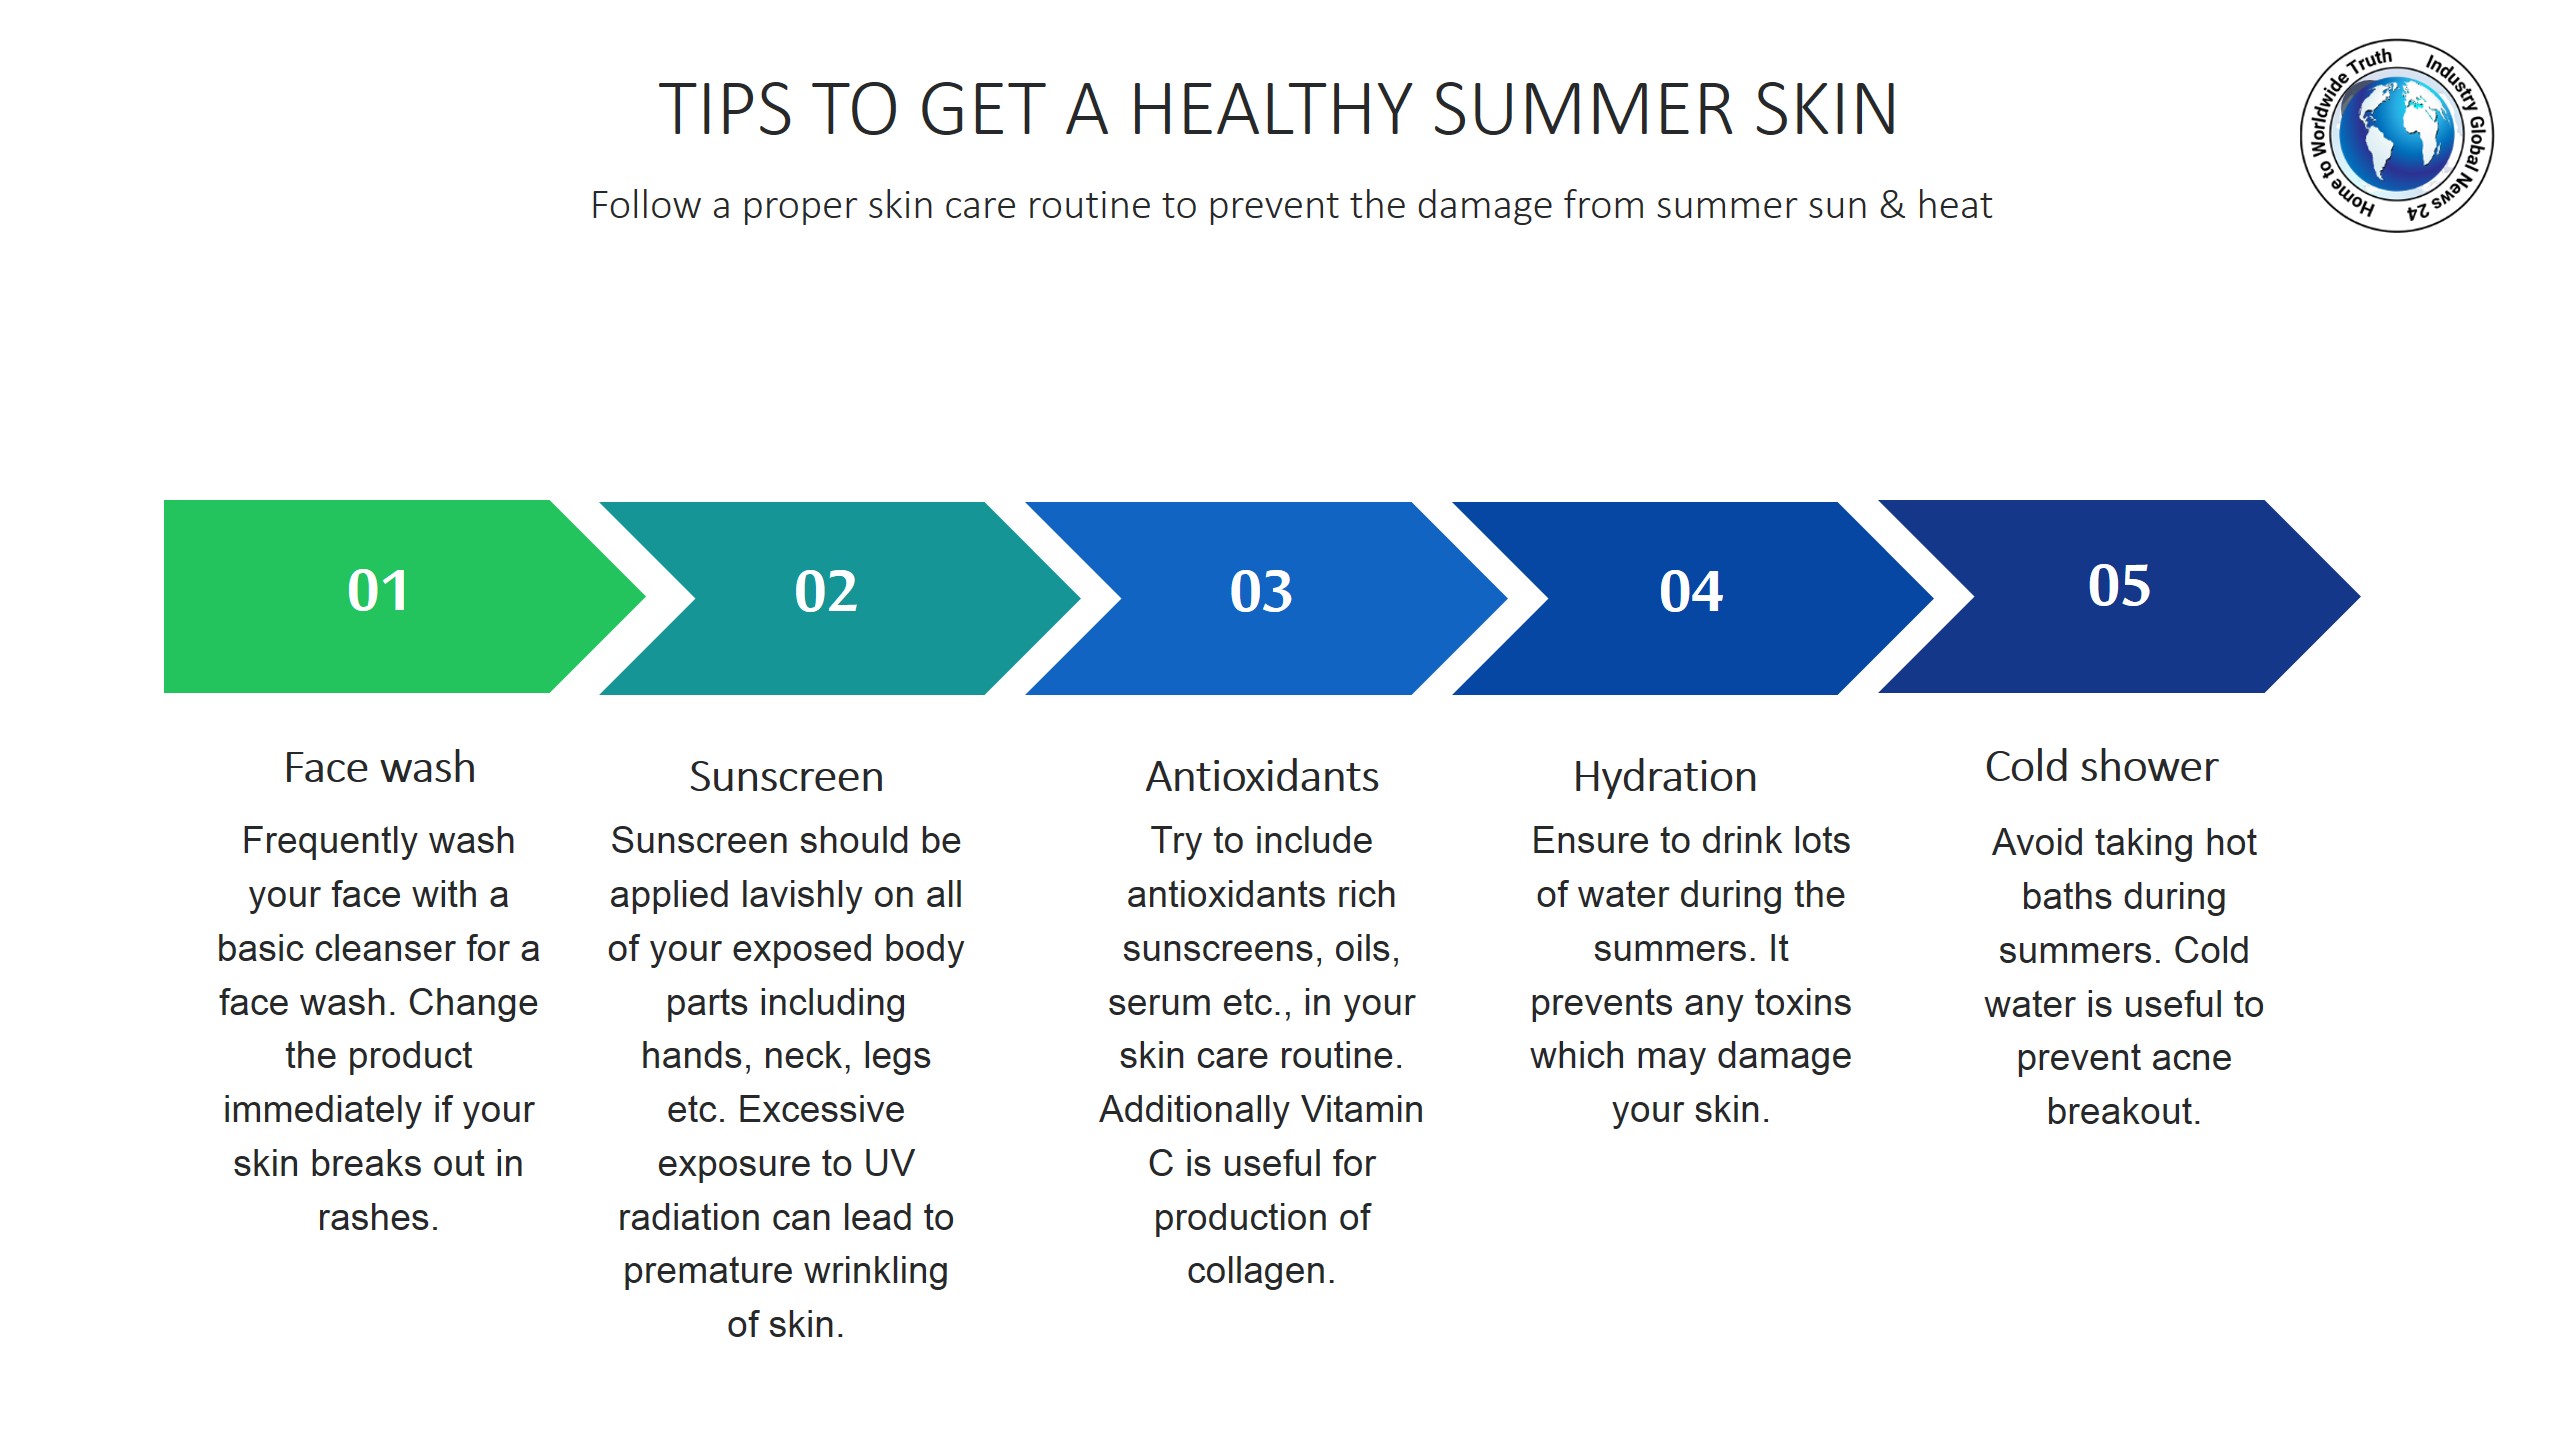 Tips to get a healthy summer skin